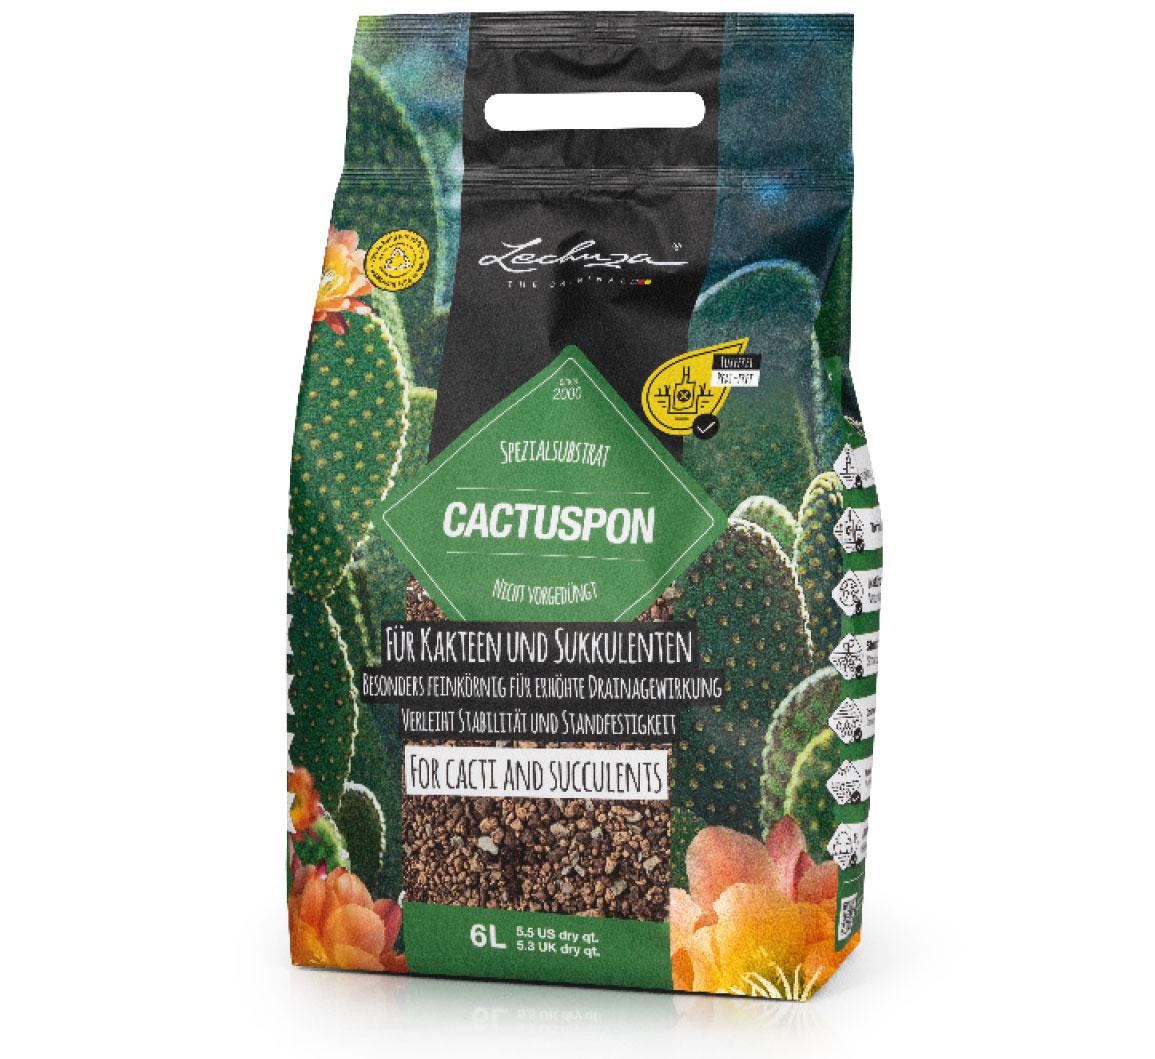 CACTUSPON: For all cacti and succulents